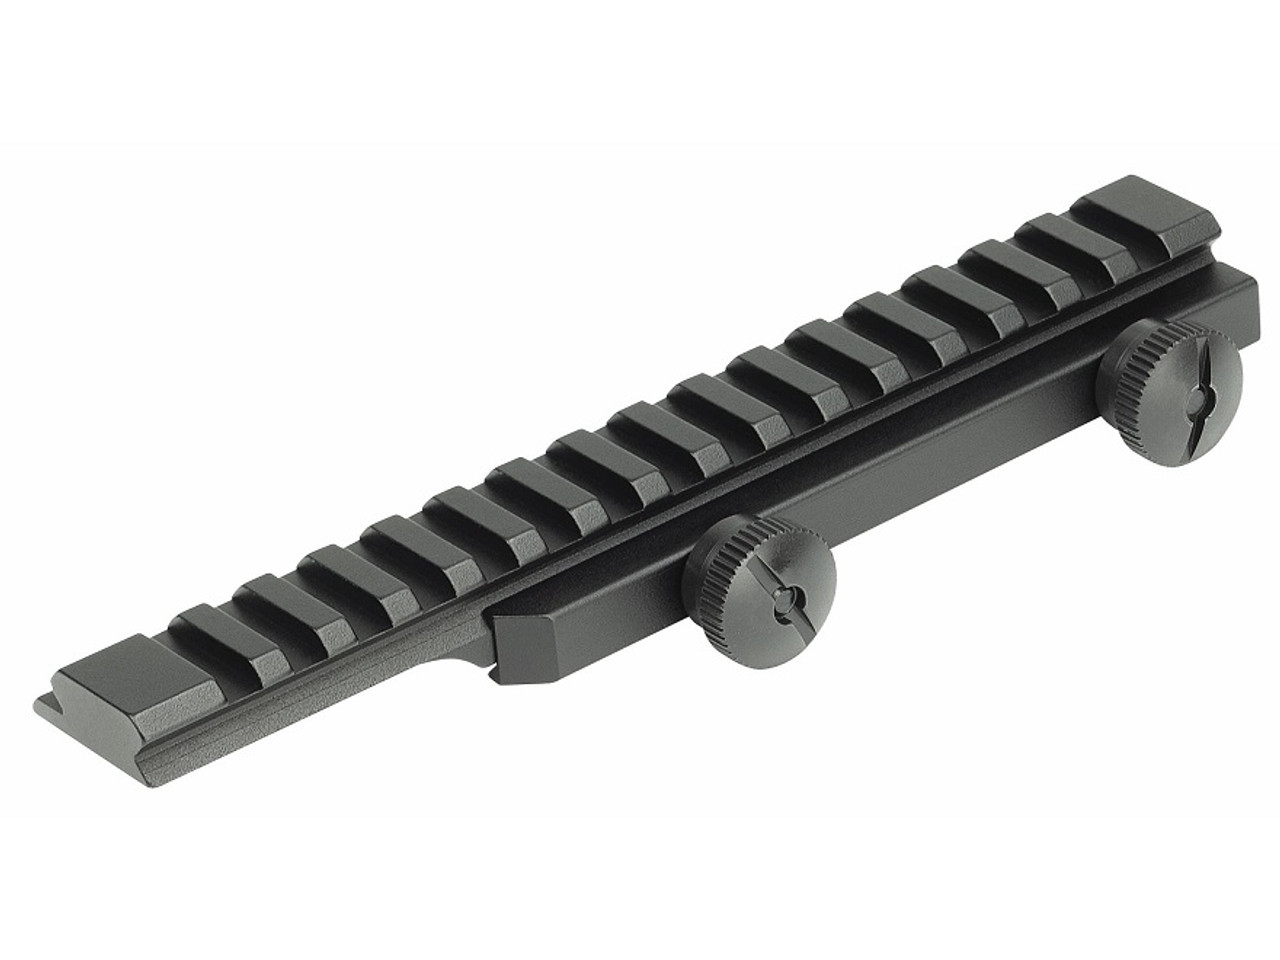 Weaver Tactical Pic-Style, (Thumb-Nut) Riser Mount AR-15 Flattop